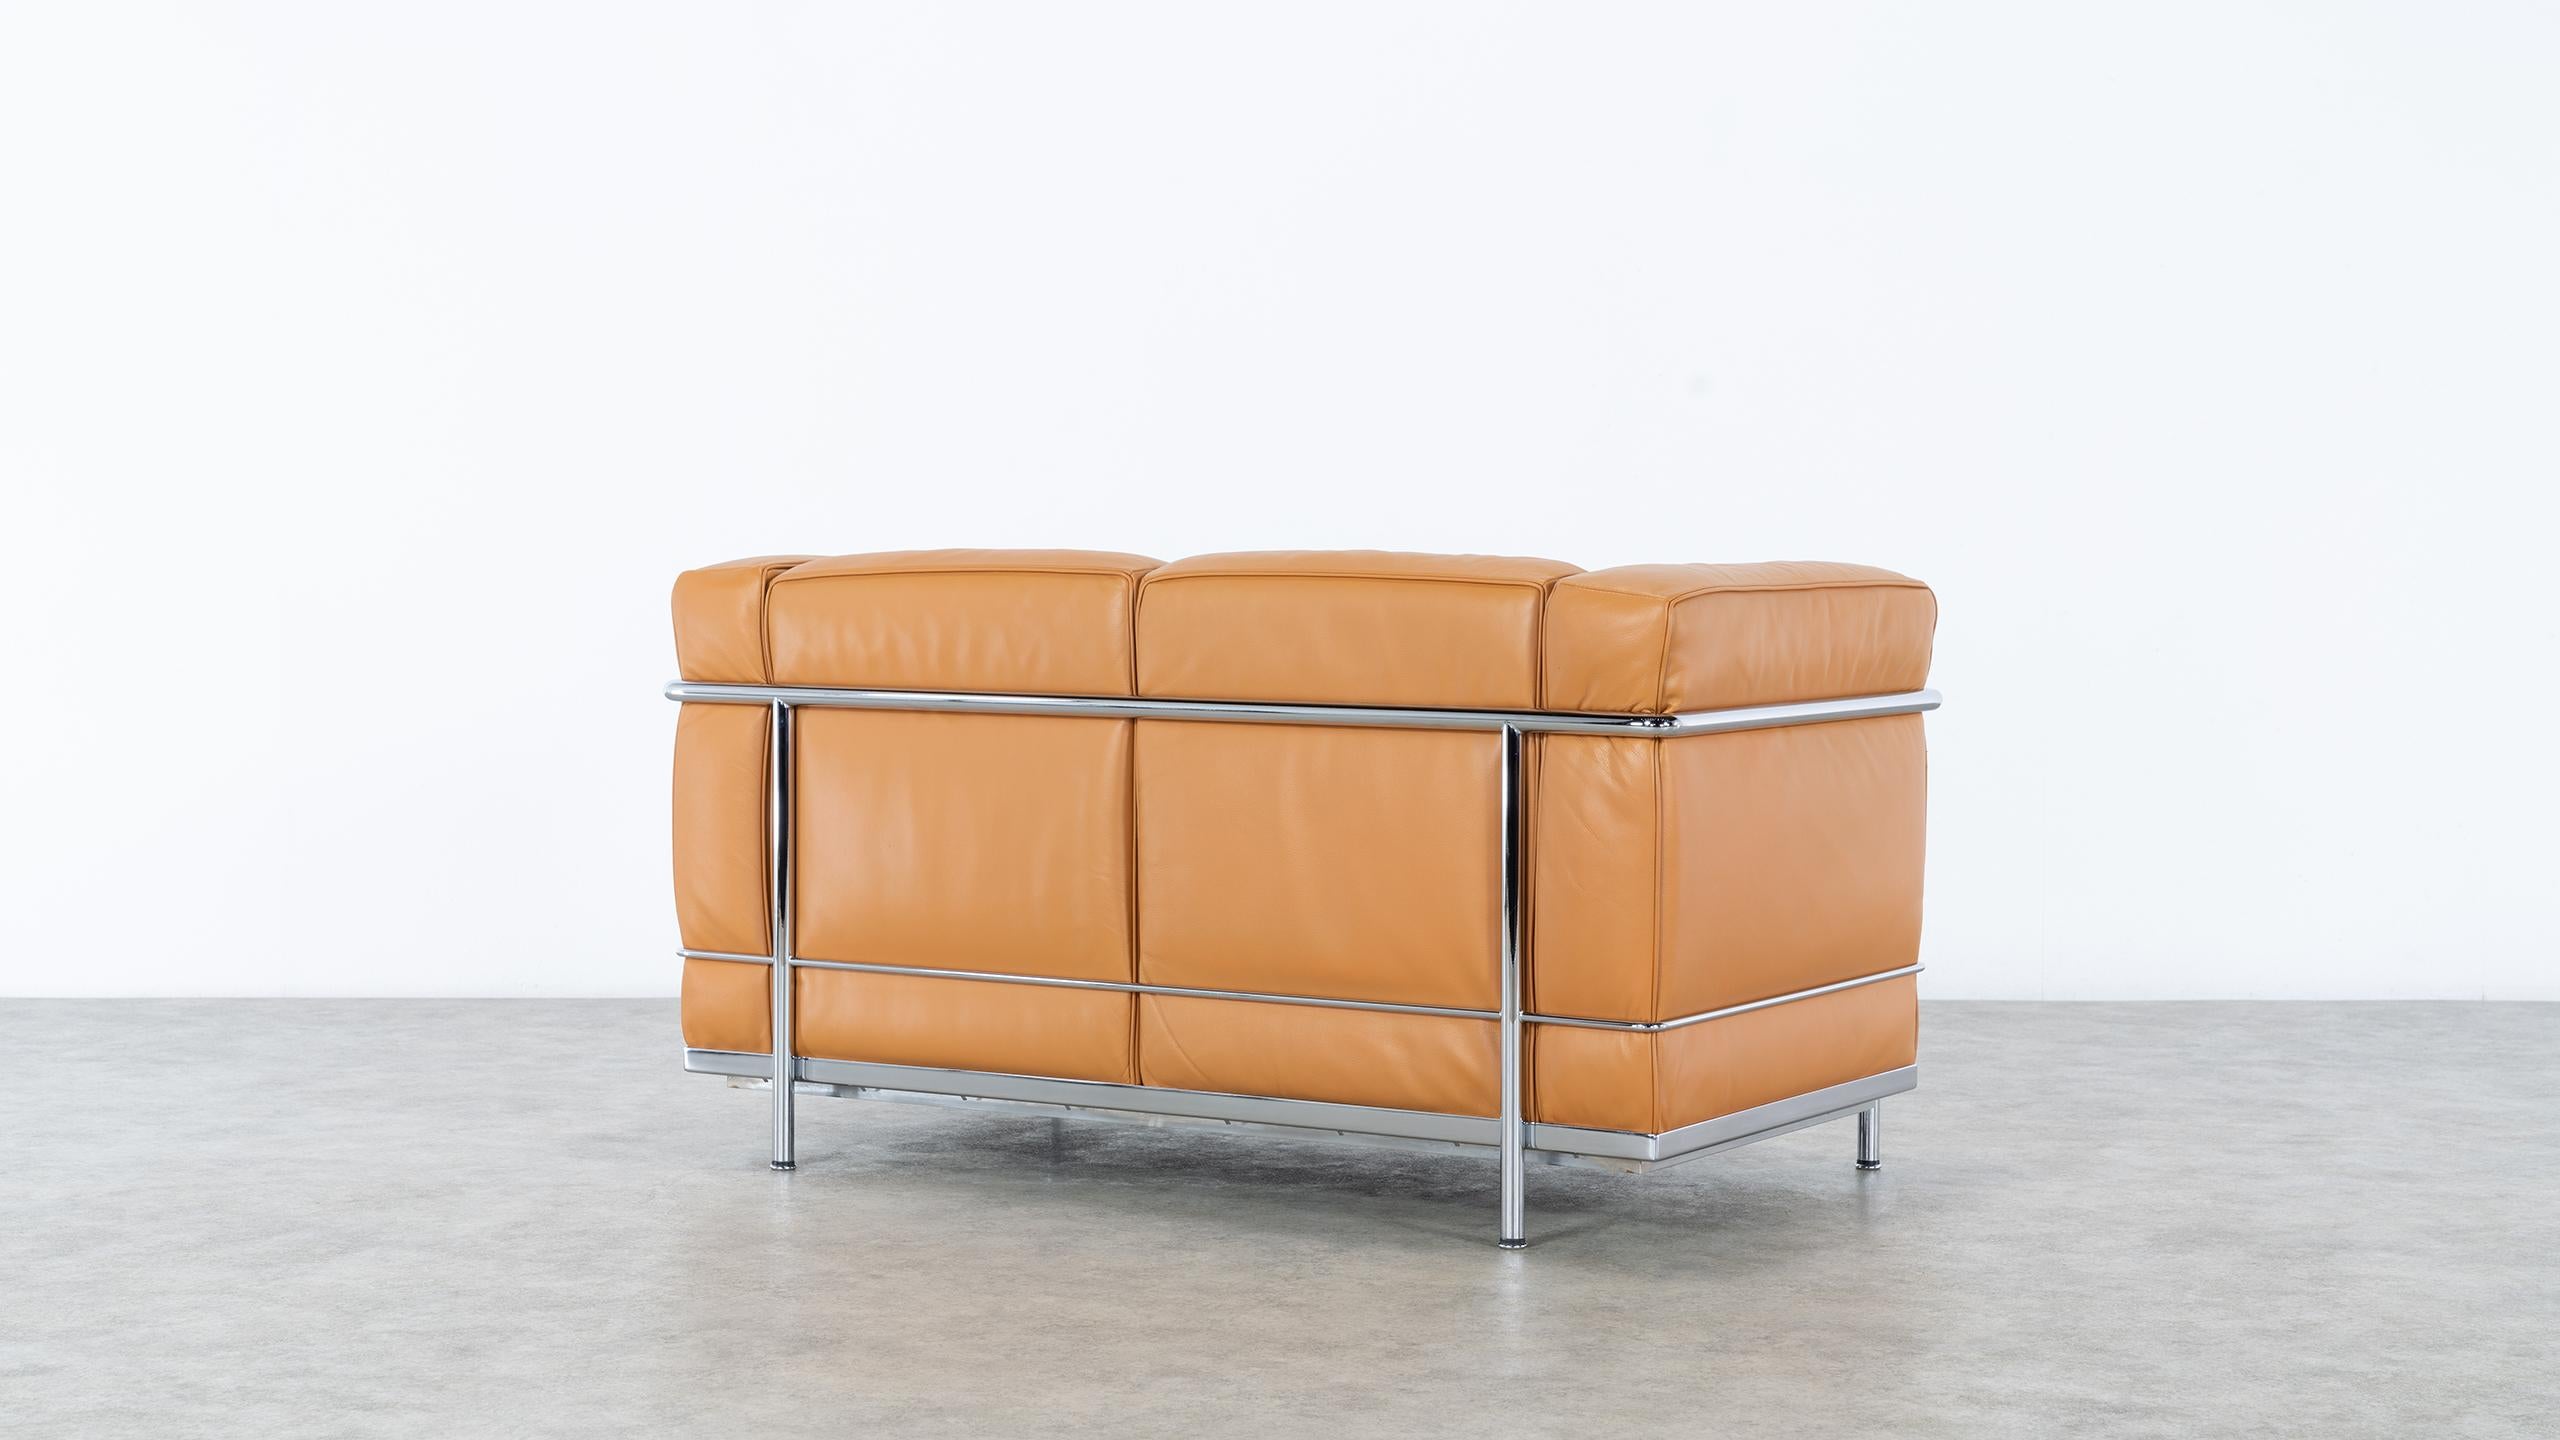 Italian Le Corbusier Ch. Perriand LC2 Sofa Cassina in Cognac Leather, Signed & Stamped